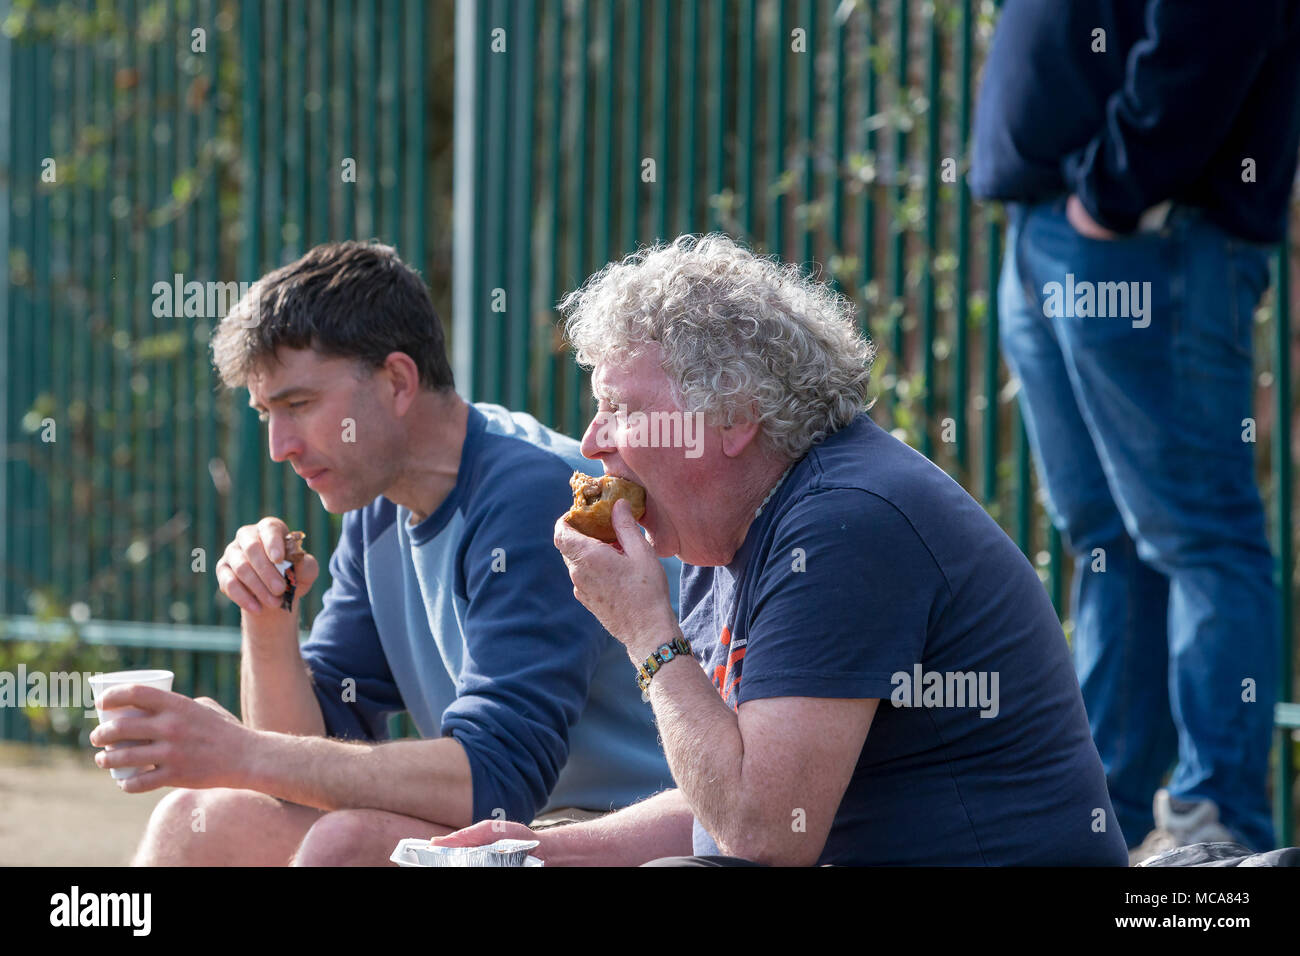 Two supporters of Warrington Town eat a snack at half time of the match at Throstle Nest, Farsley during the game between Warrington Town FC and Farsley Celtic on 14 April 2018 where Warrington won 2 - 0 Credit: John Hopkins/Alamy Live News Stock Photo